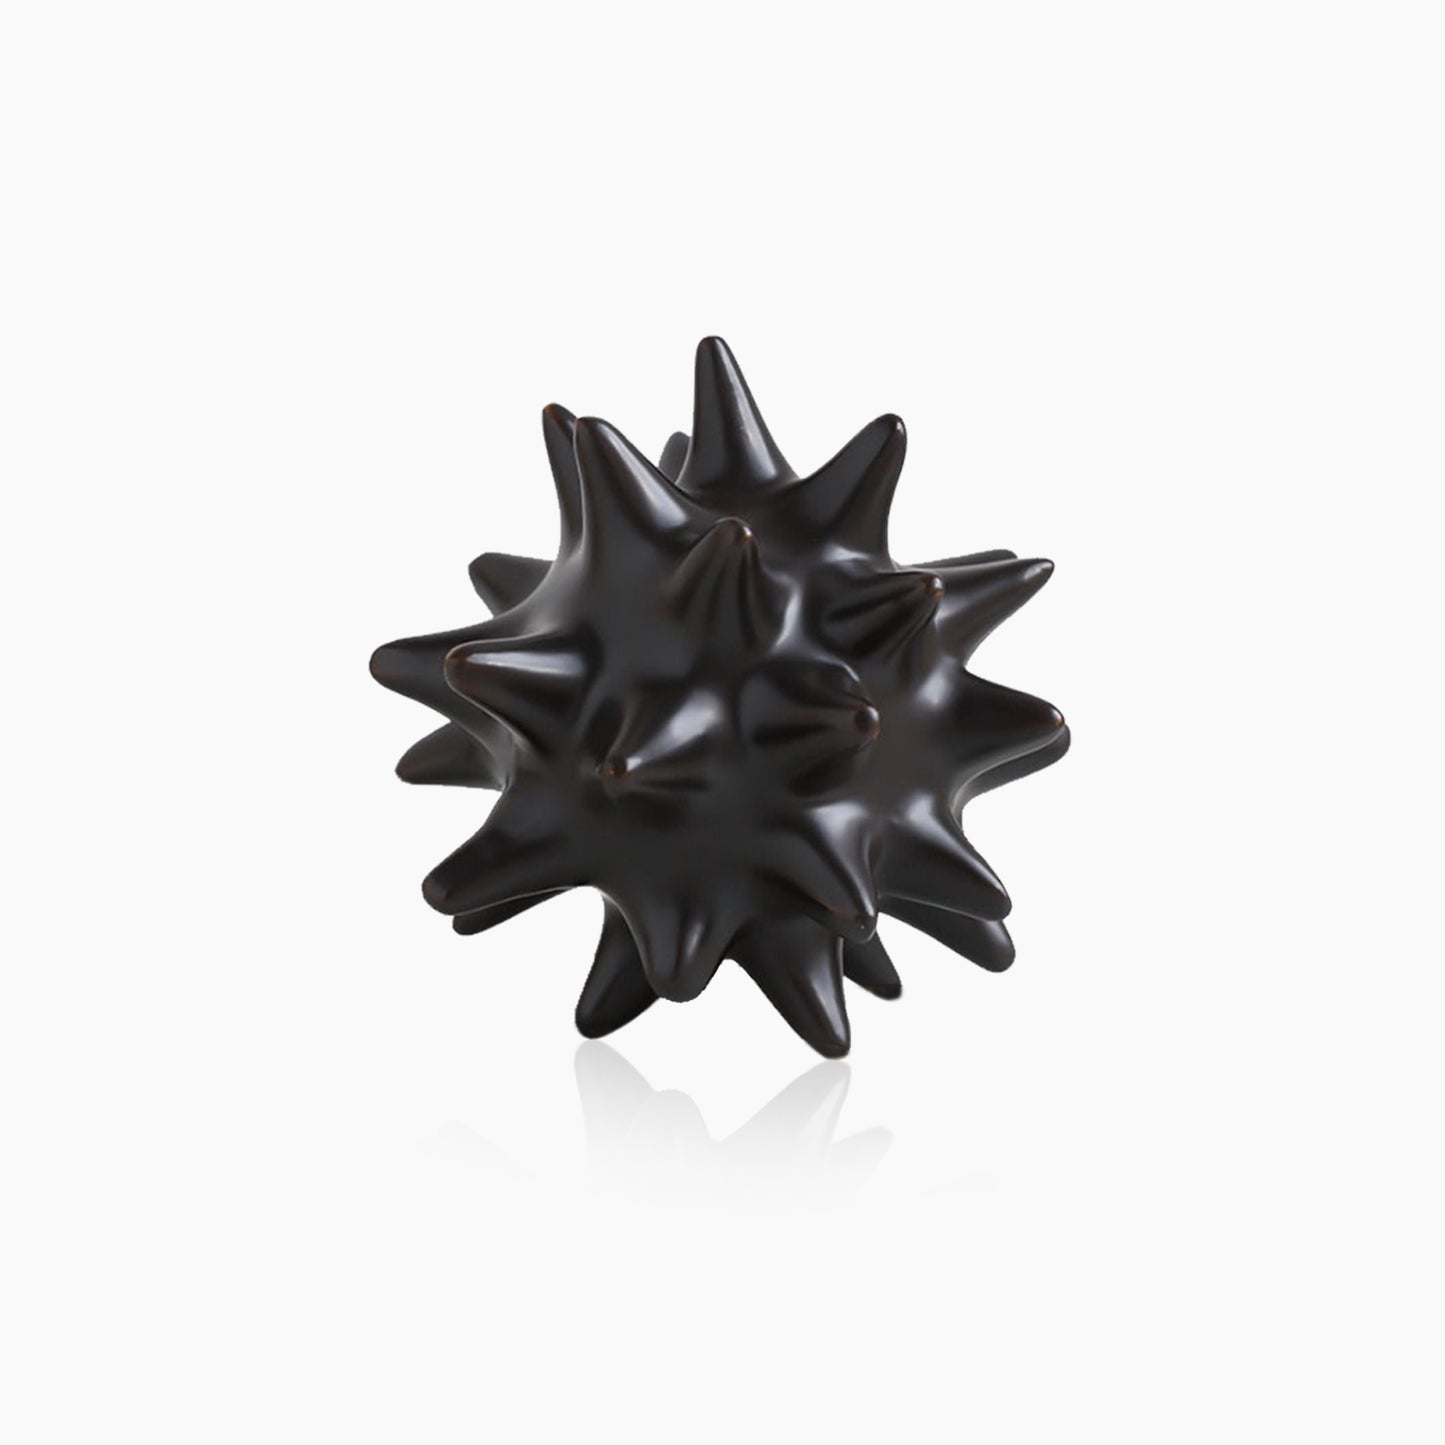 Sea Urchin Hand-Crafted Ornament